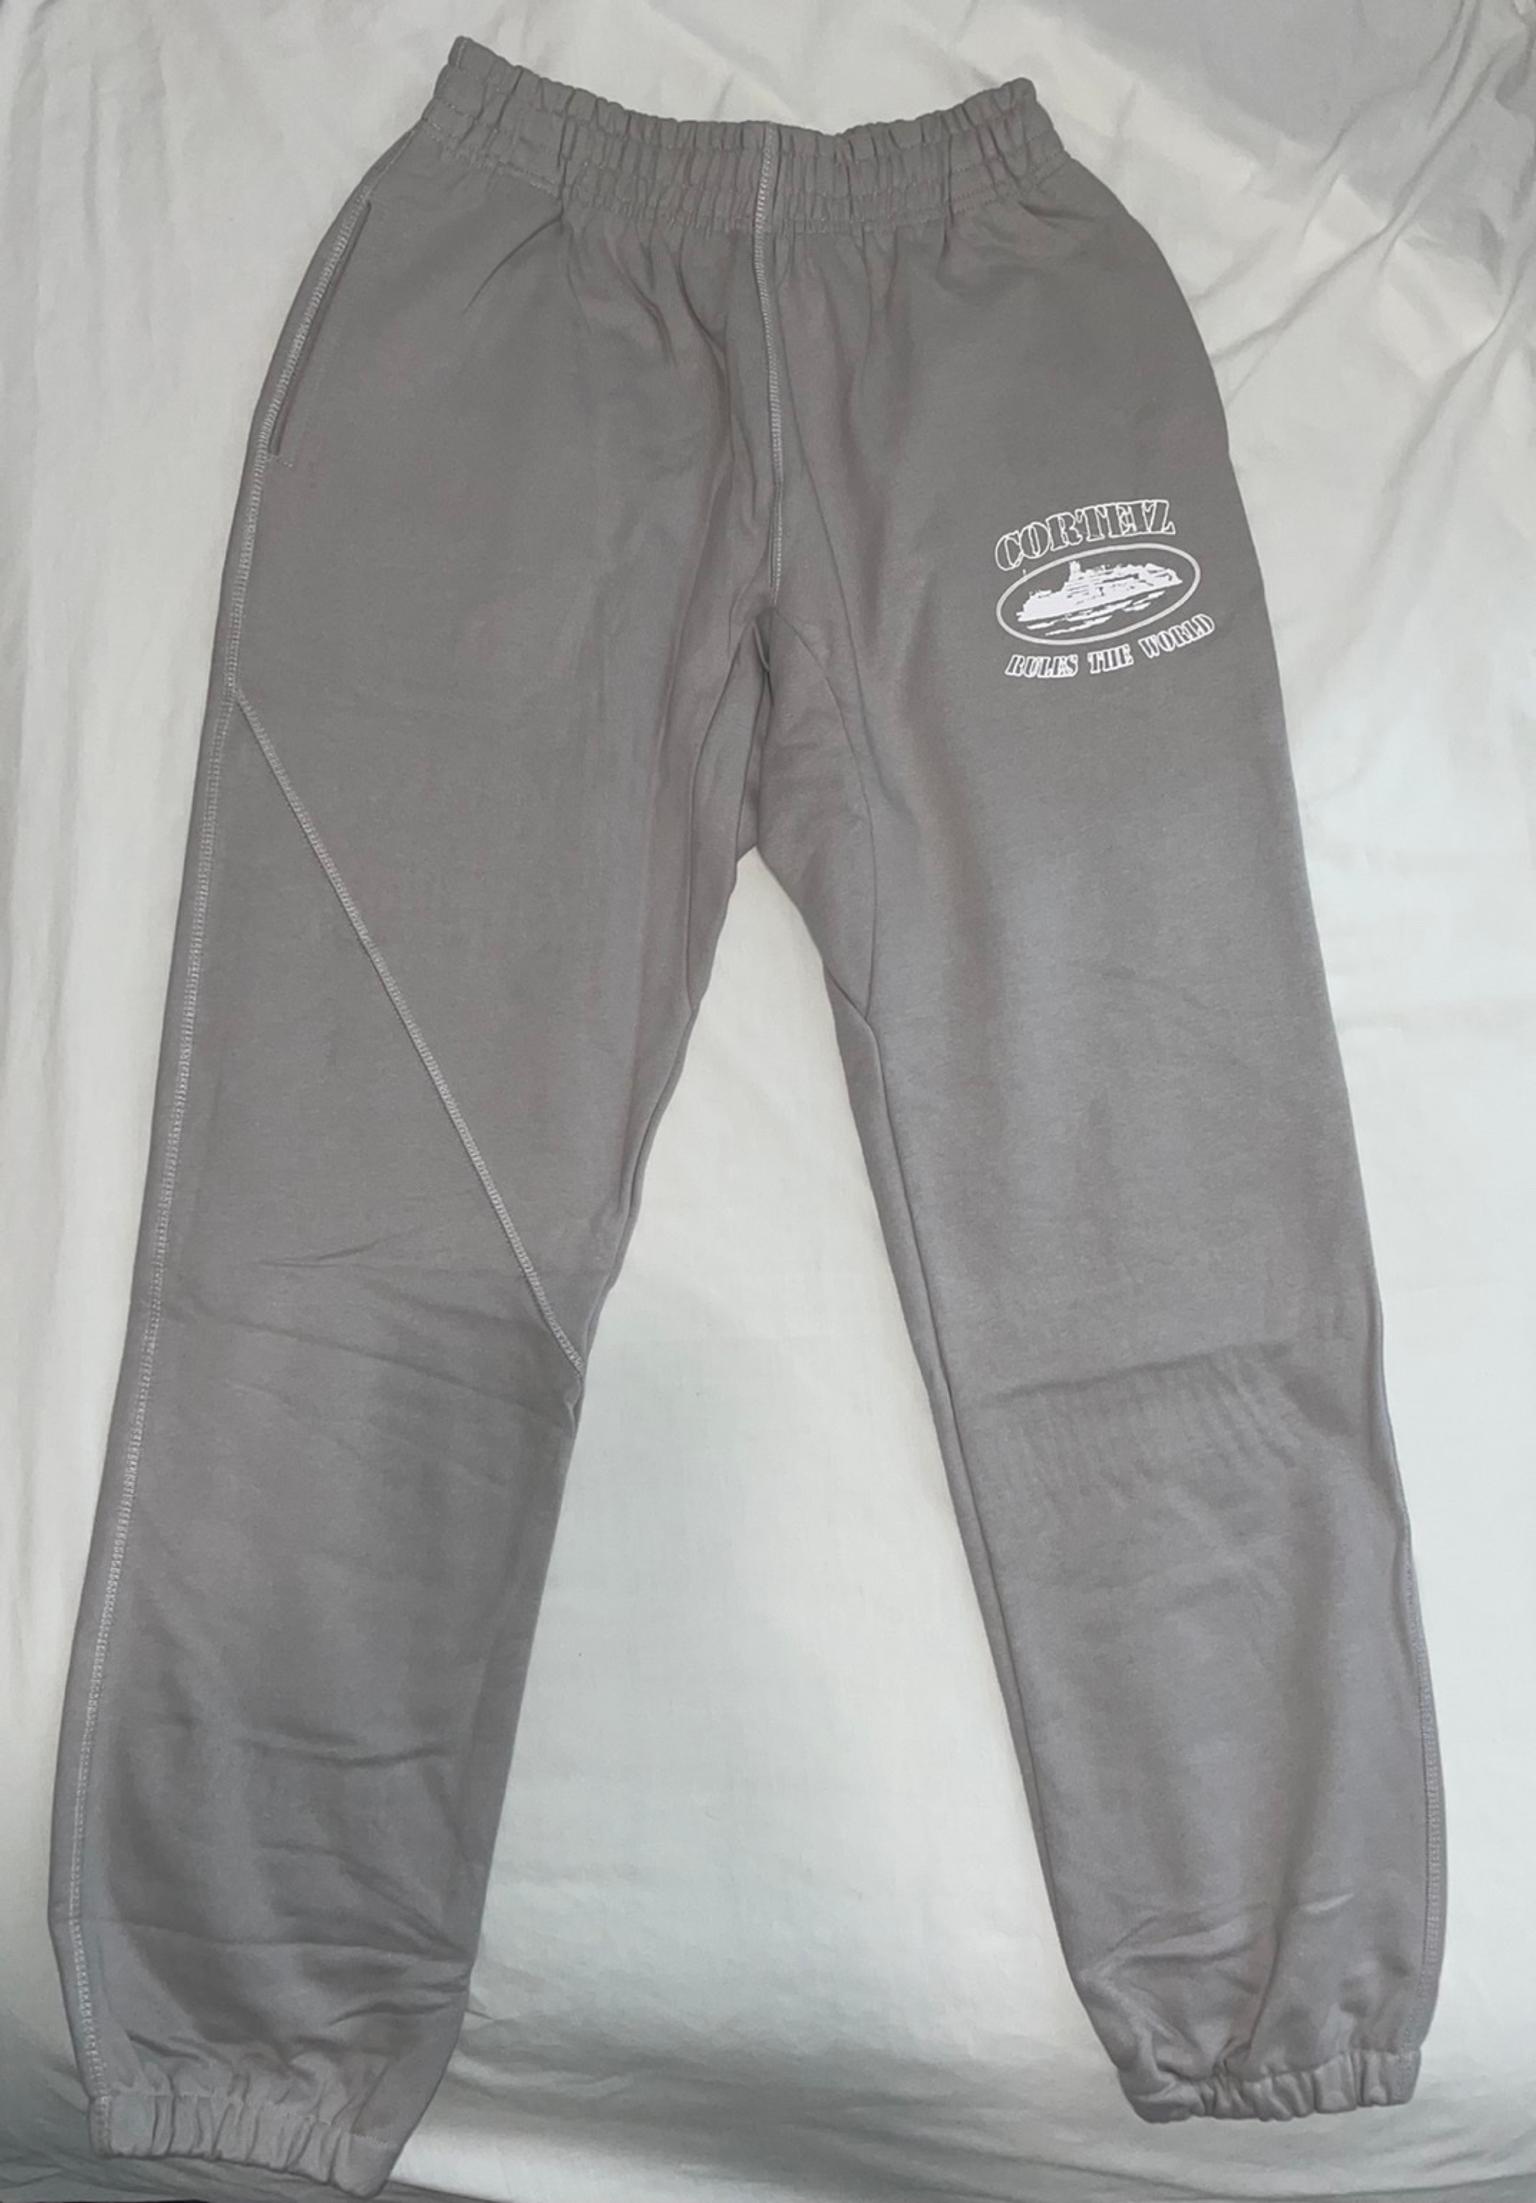 CORTIEZ SUPERIOR STONE TRACKSUIT BOTTOMS in SW19 London for £150.00 for ...